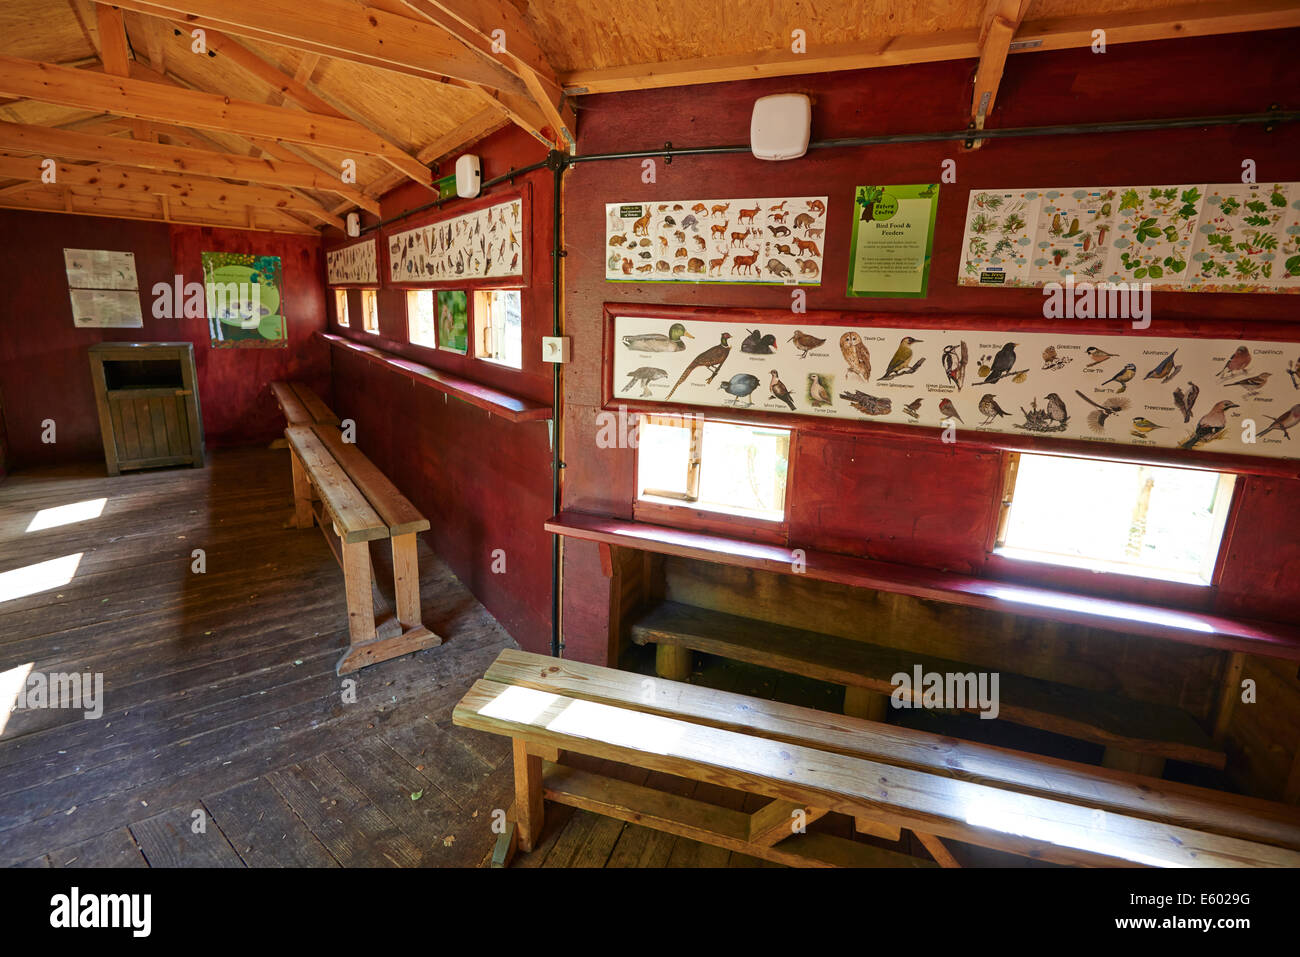 Inside A Wildlife Feeding Hide With A Pictorial Guide To The Wildlife Likely To Be Seen Center Parcs Sherwood Forest UK Stock Photo